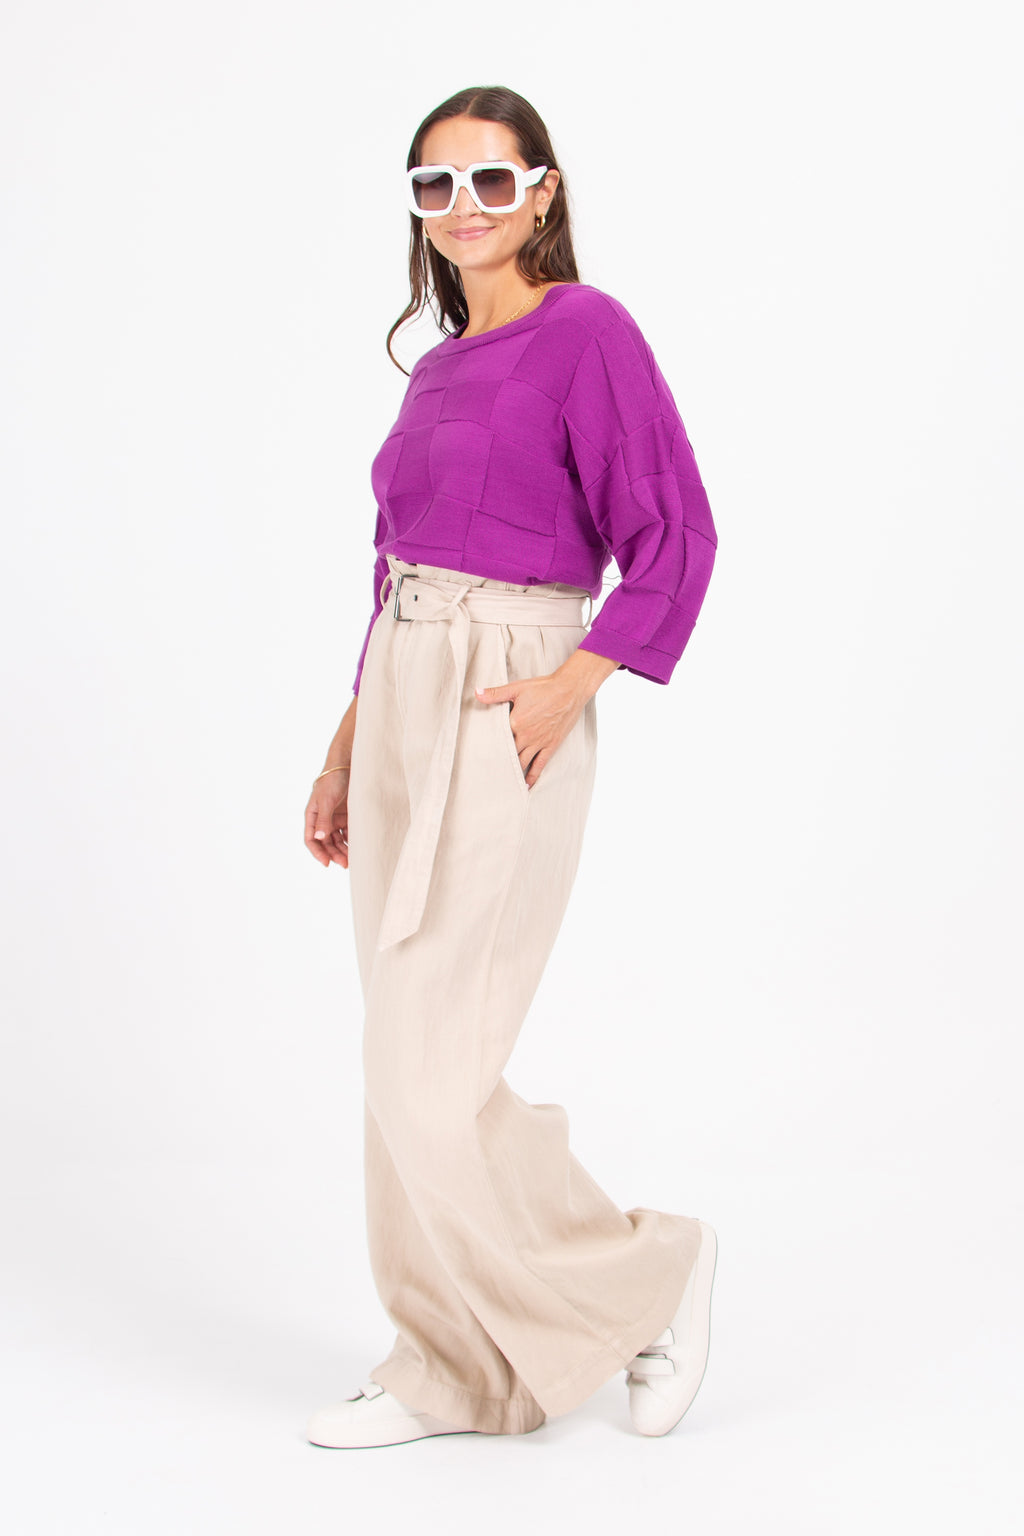 Saturno purple knitted sweater